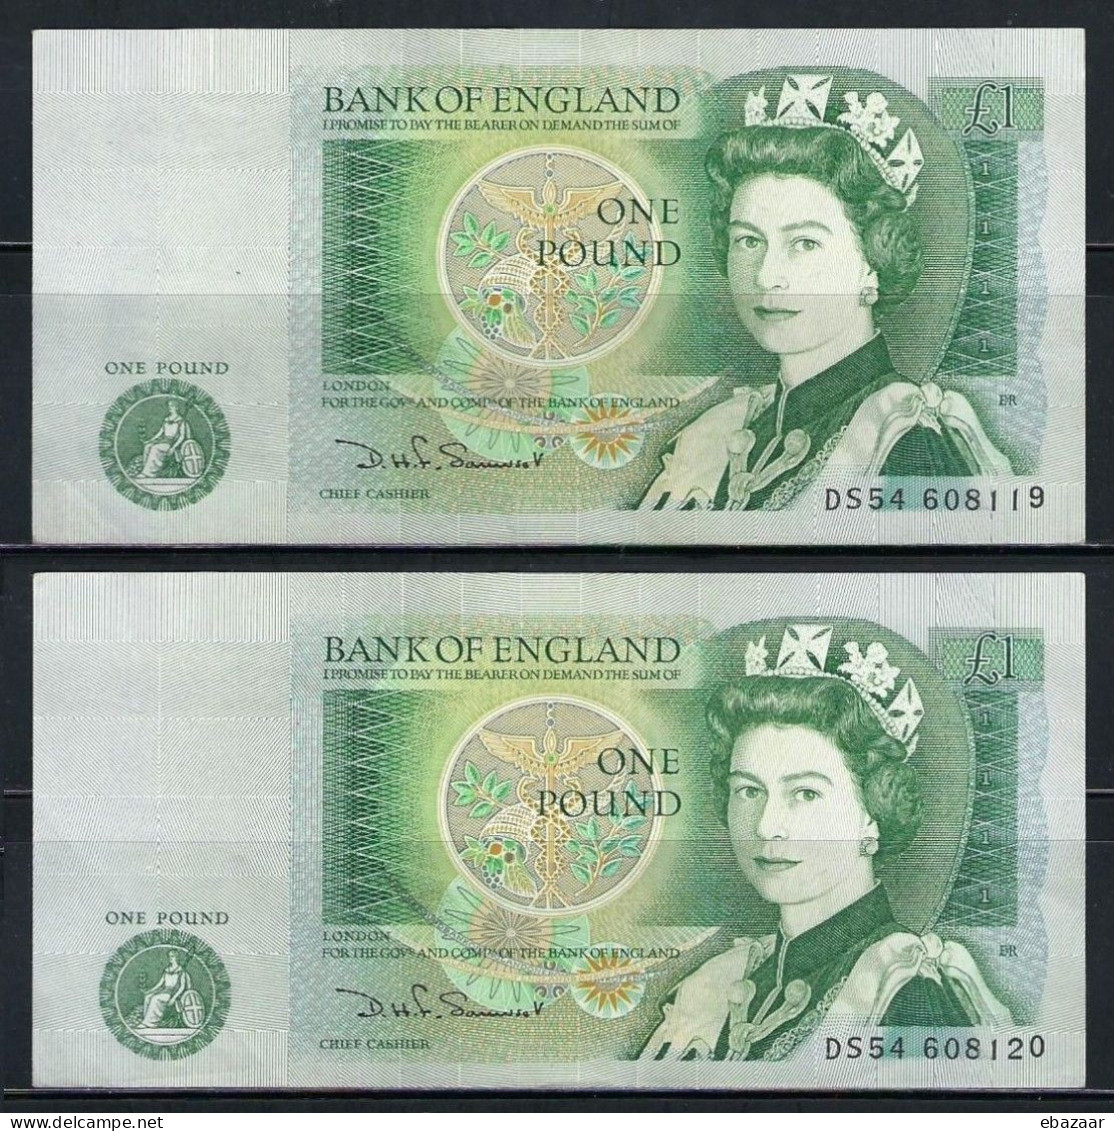 Great Britain Bank Of England 1 Pound Banknotes P-377b Consecutive Serial Numbers D. H. F. Somerset 1978-1984 UNC - 1 Pound